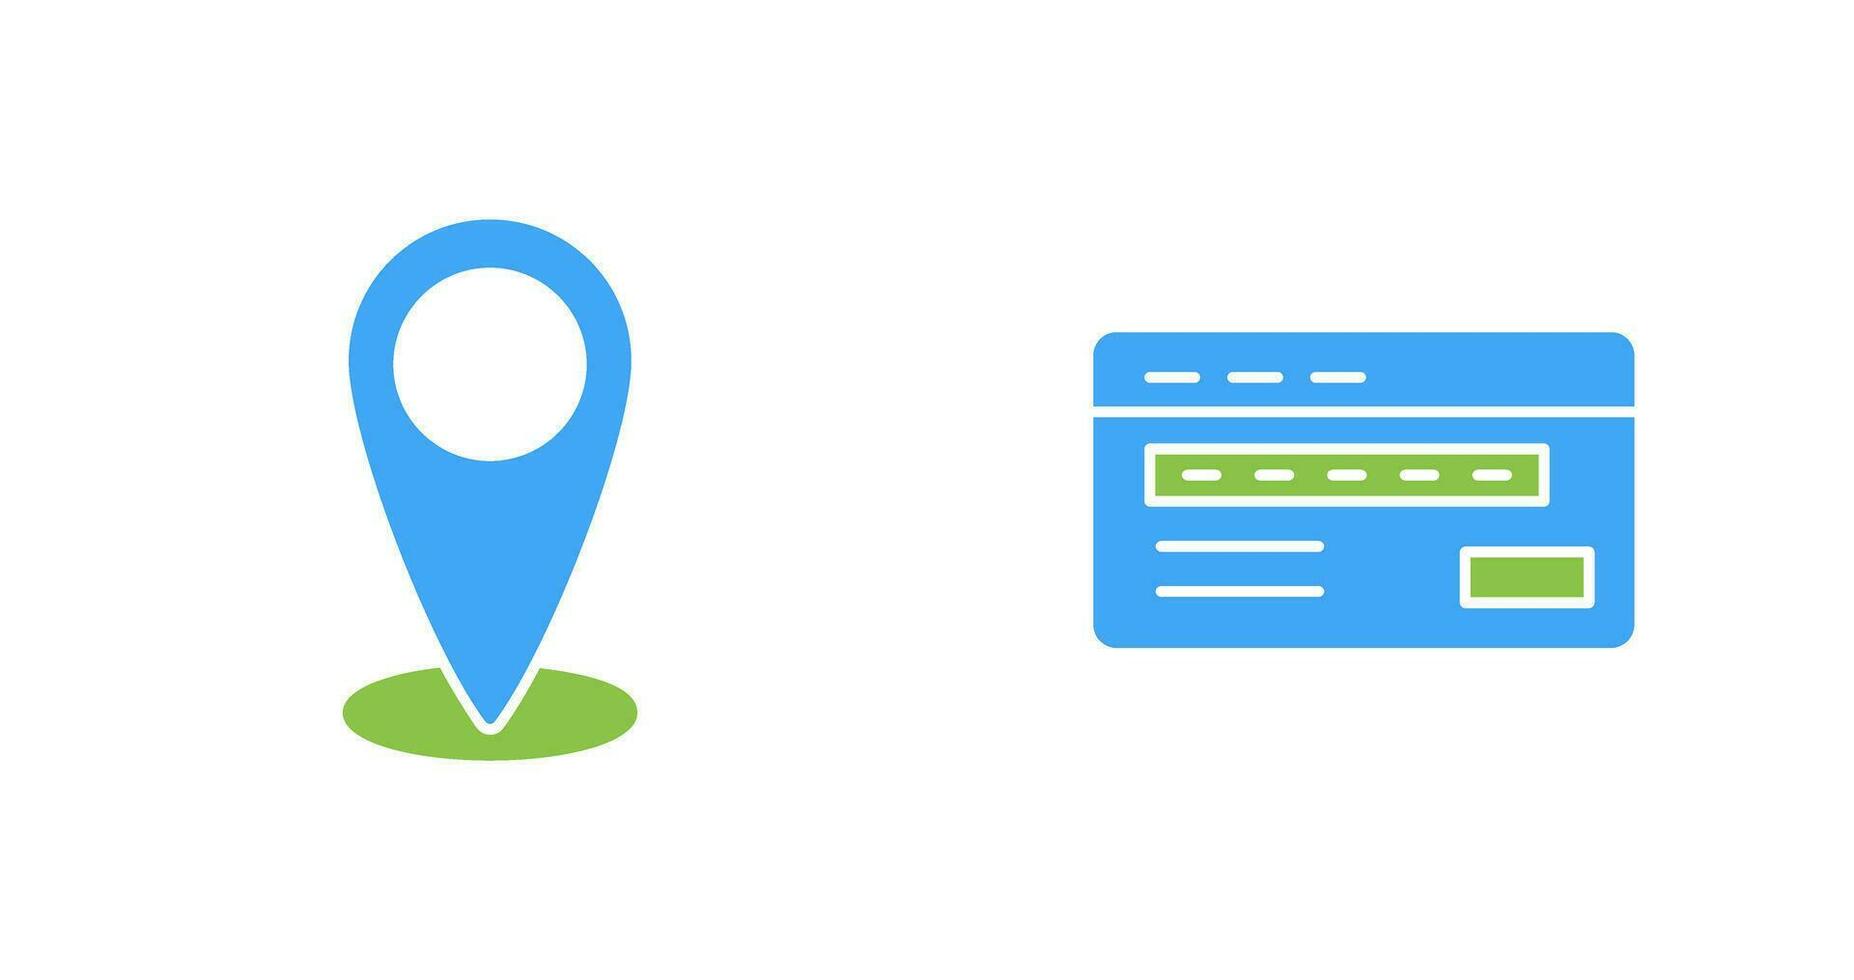 location and credit card Icon vector